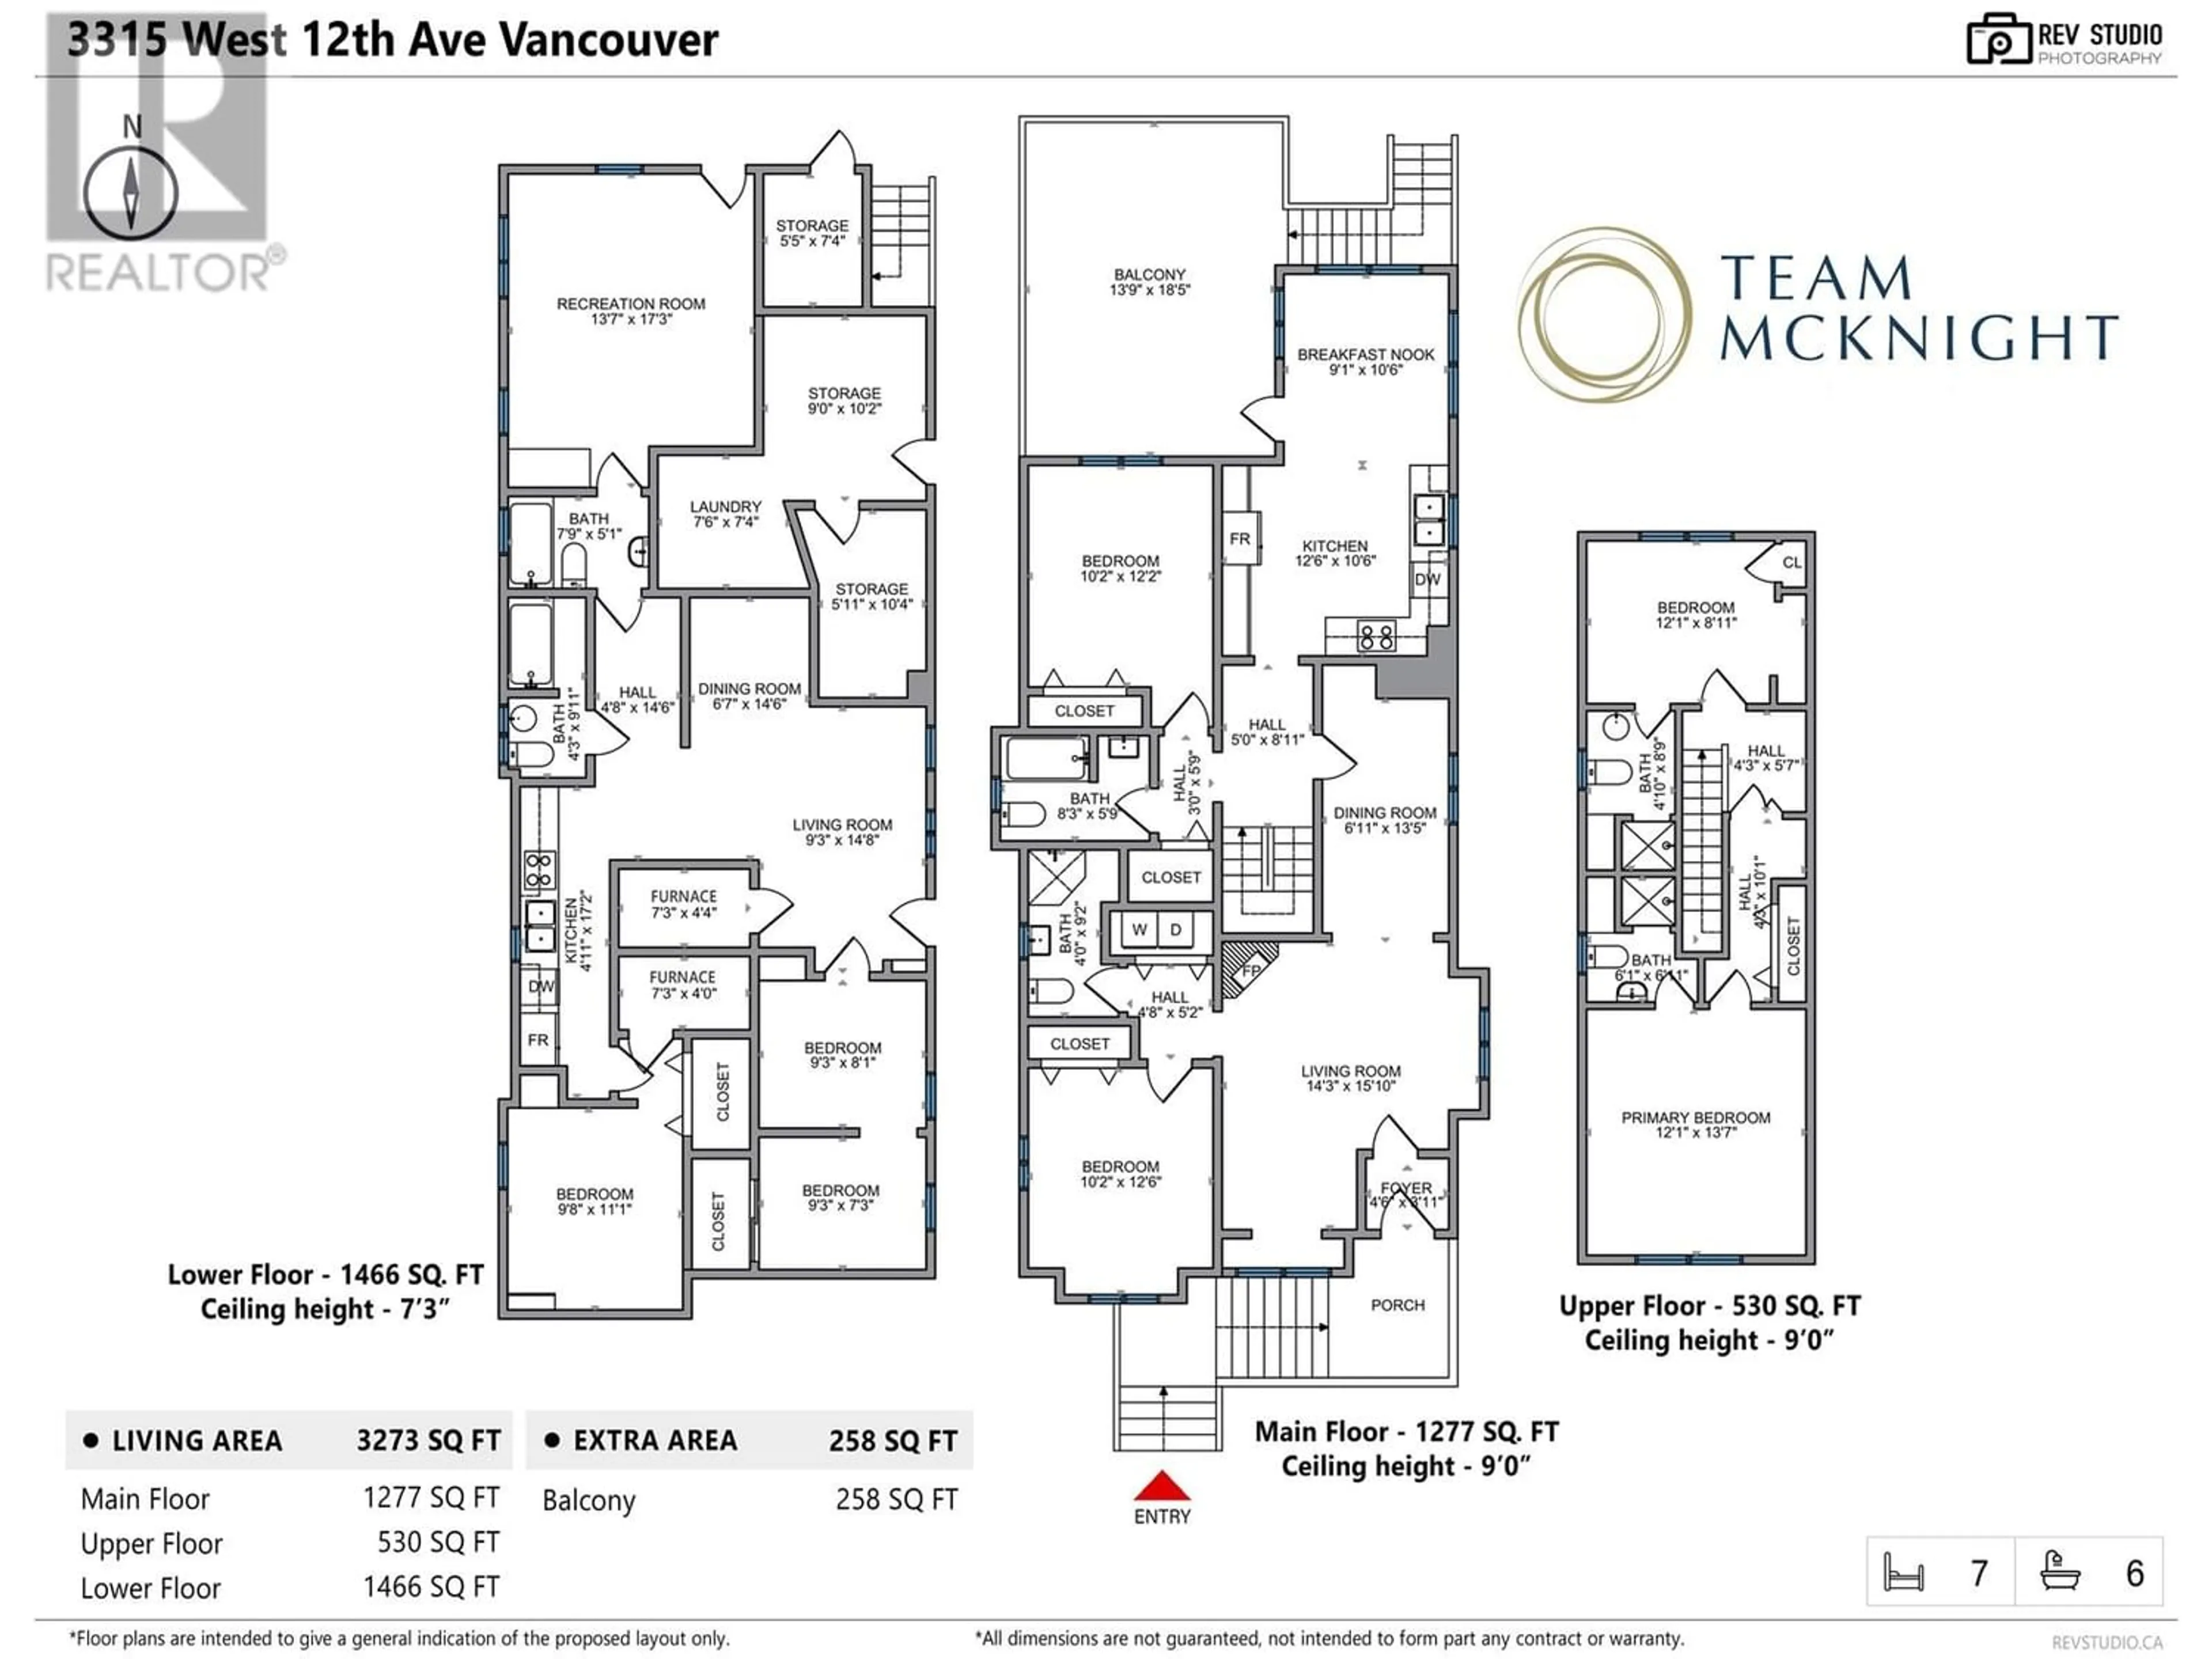 Floor plan for 3315 W 12TH AVENUE, Vancouver British Columbia V6R2M8